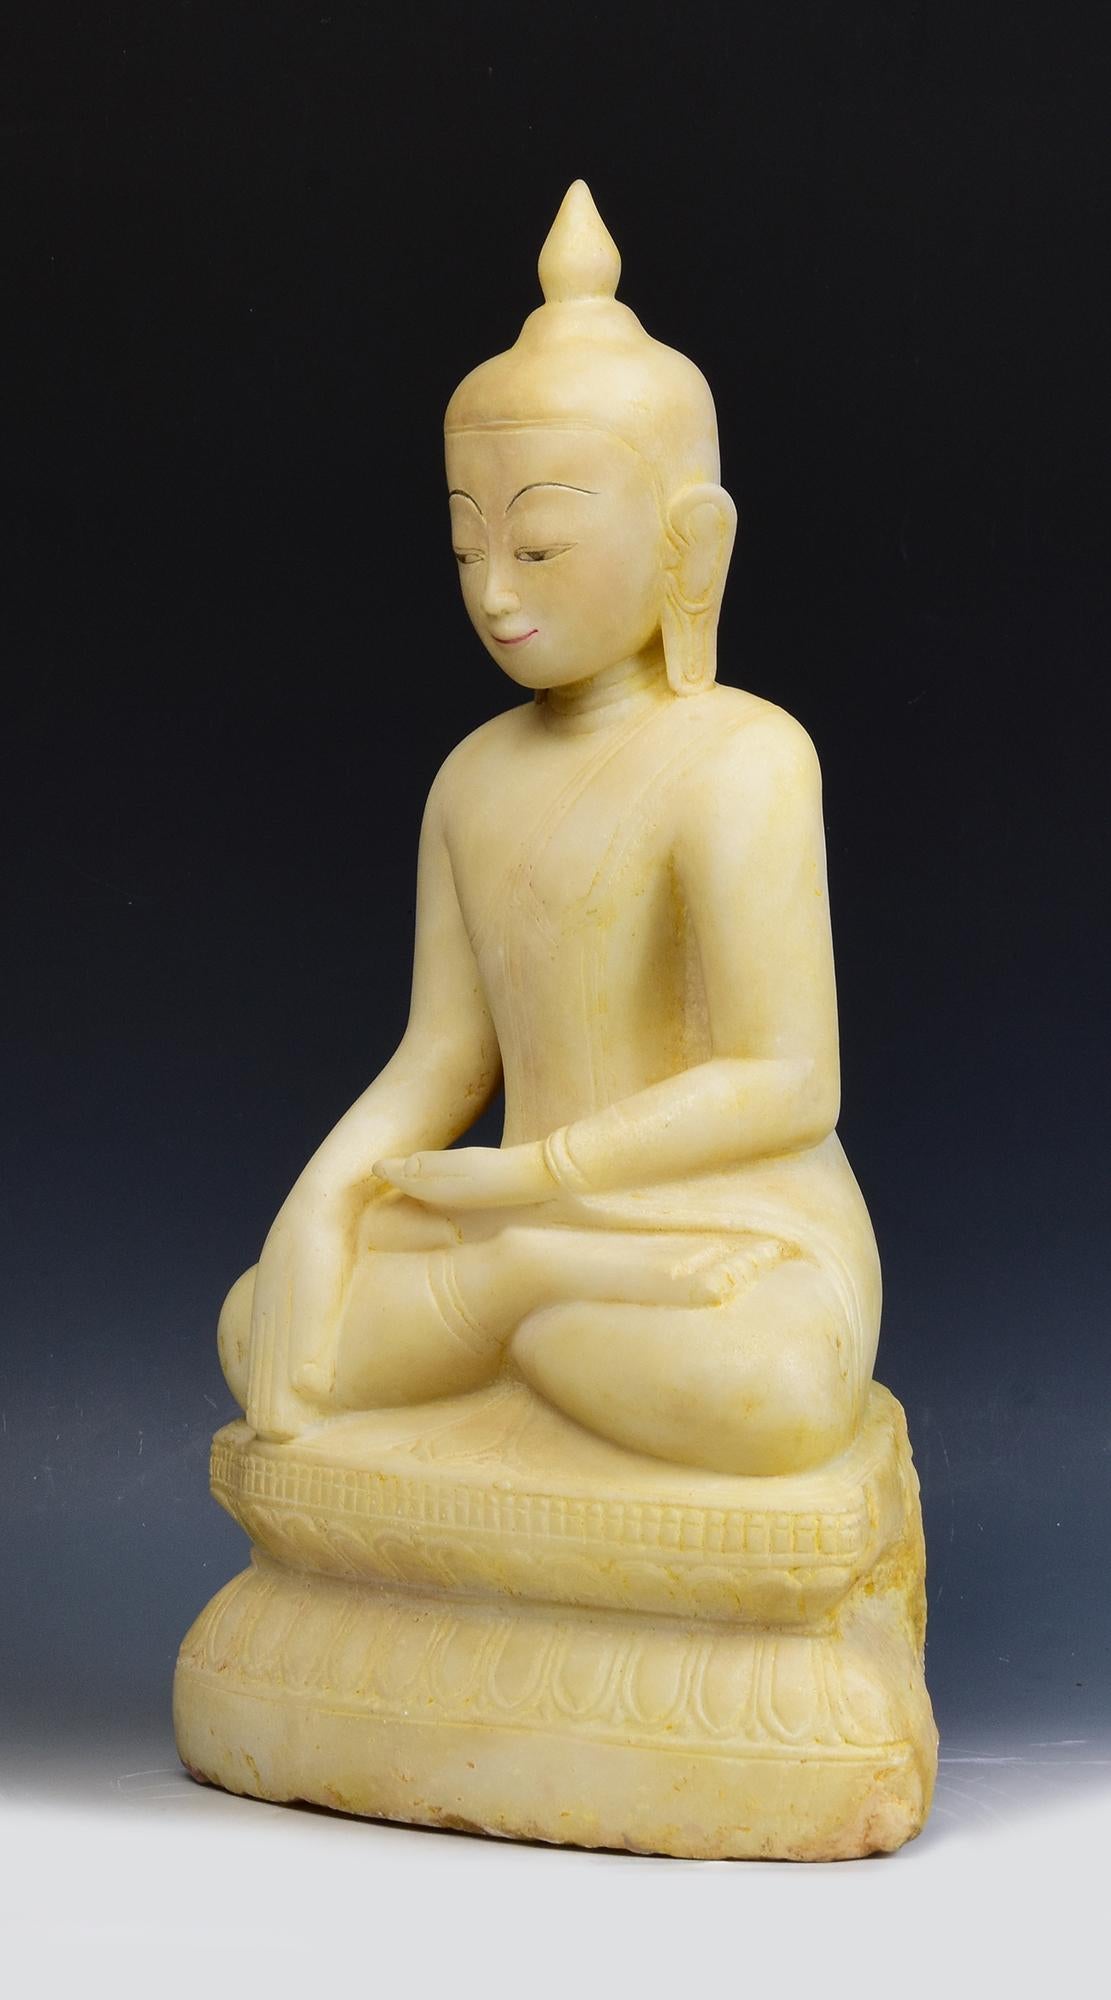 17th - 18th Century, Shan, Antique Burmese Alabaster Marble Seated Buddha Statue 3